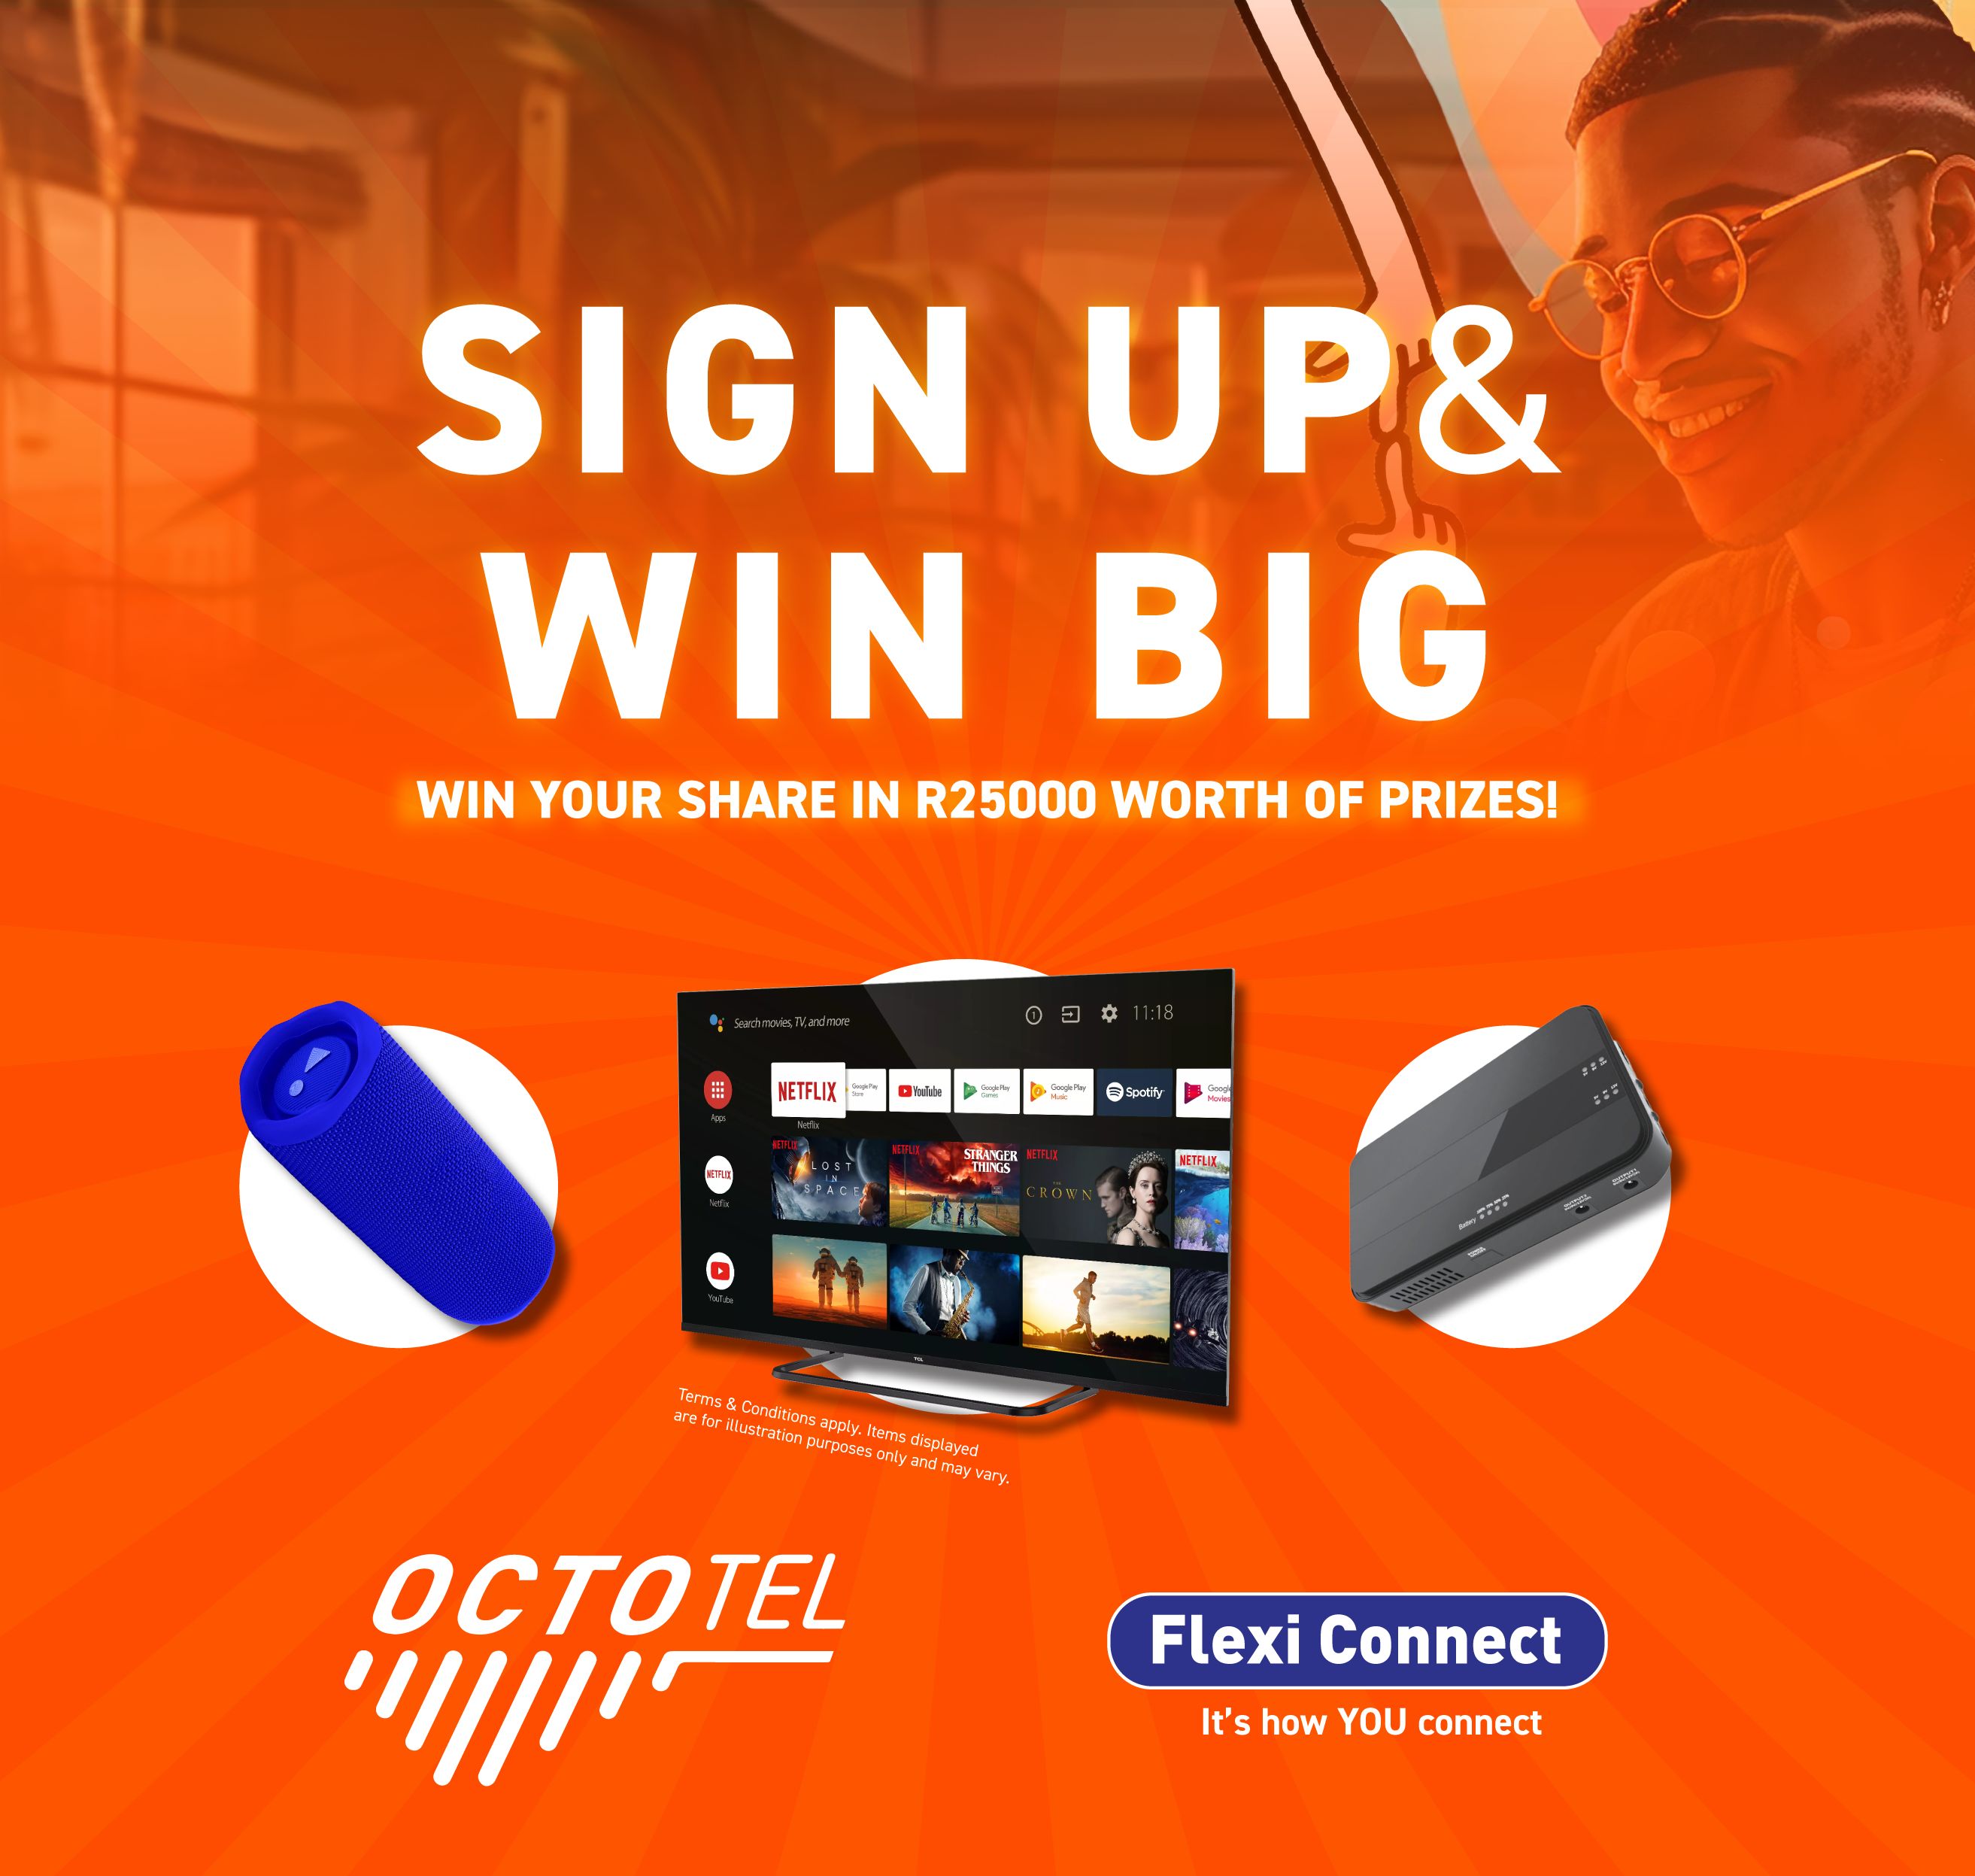 Take your Internet Experience to the Next Level with OCTOTEL FLEXI CONNECT & Win Prizes Worth 25K.